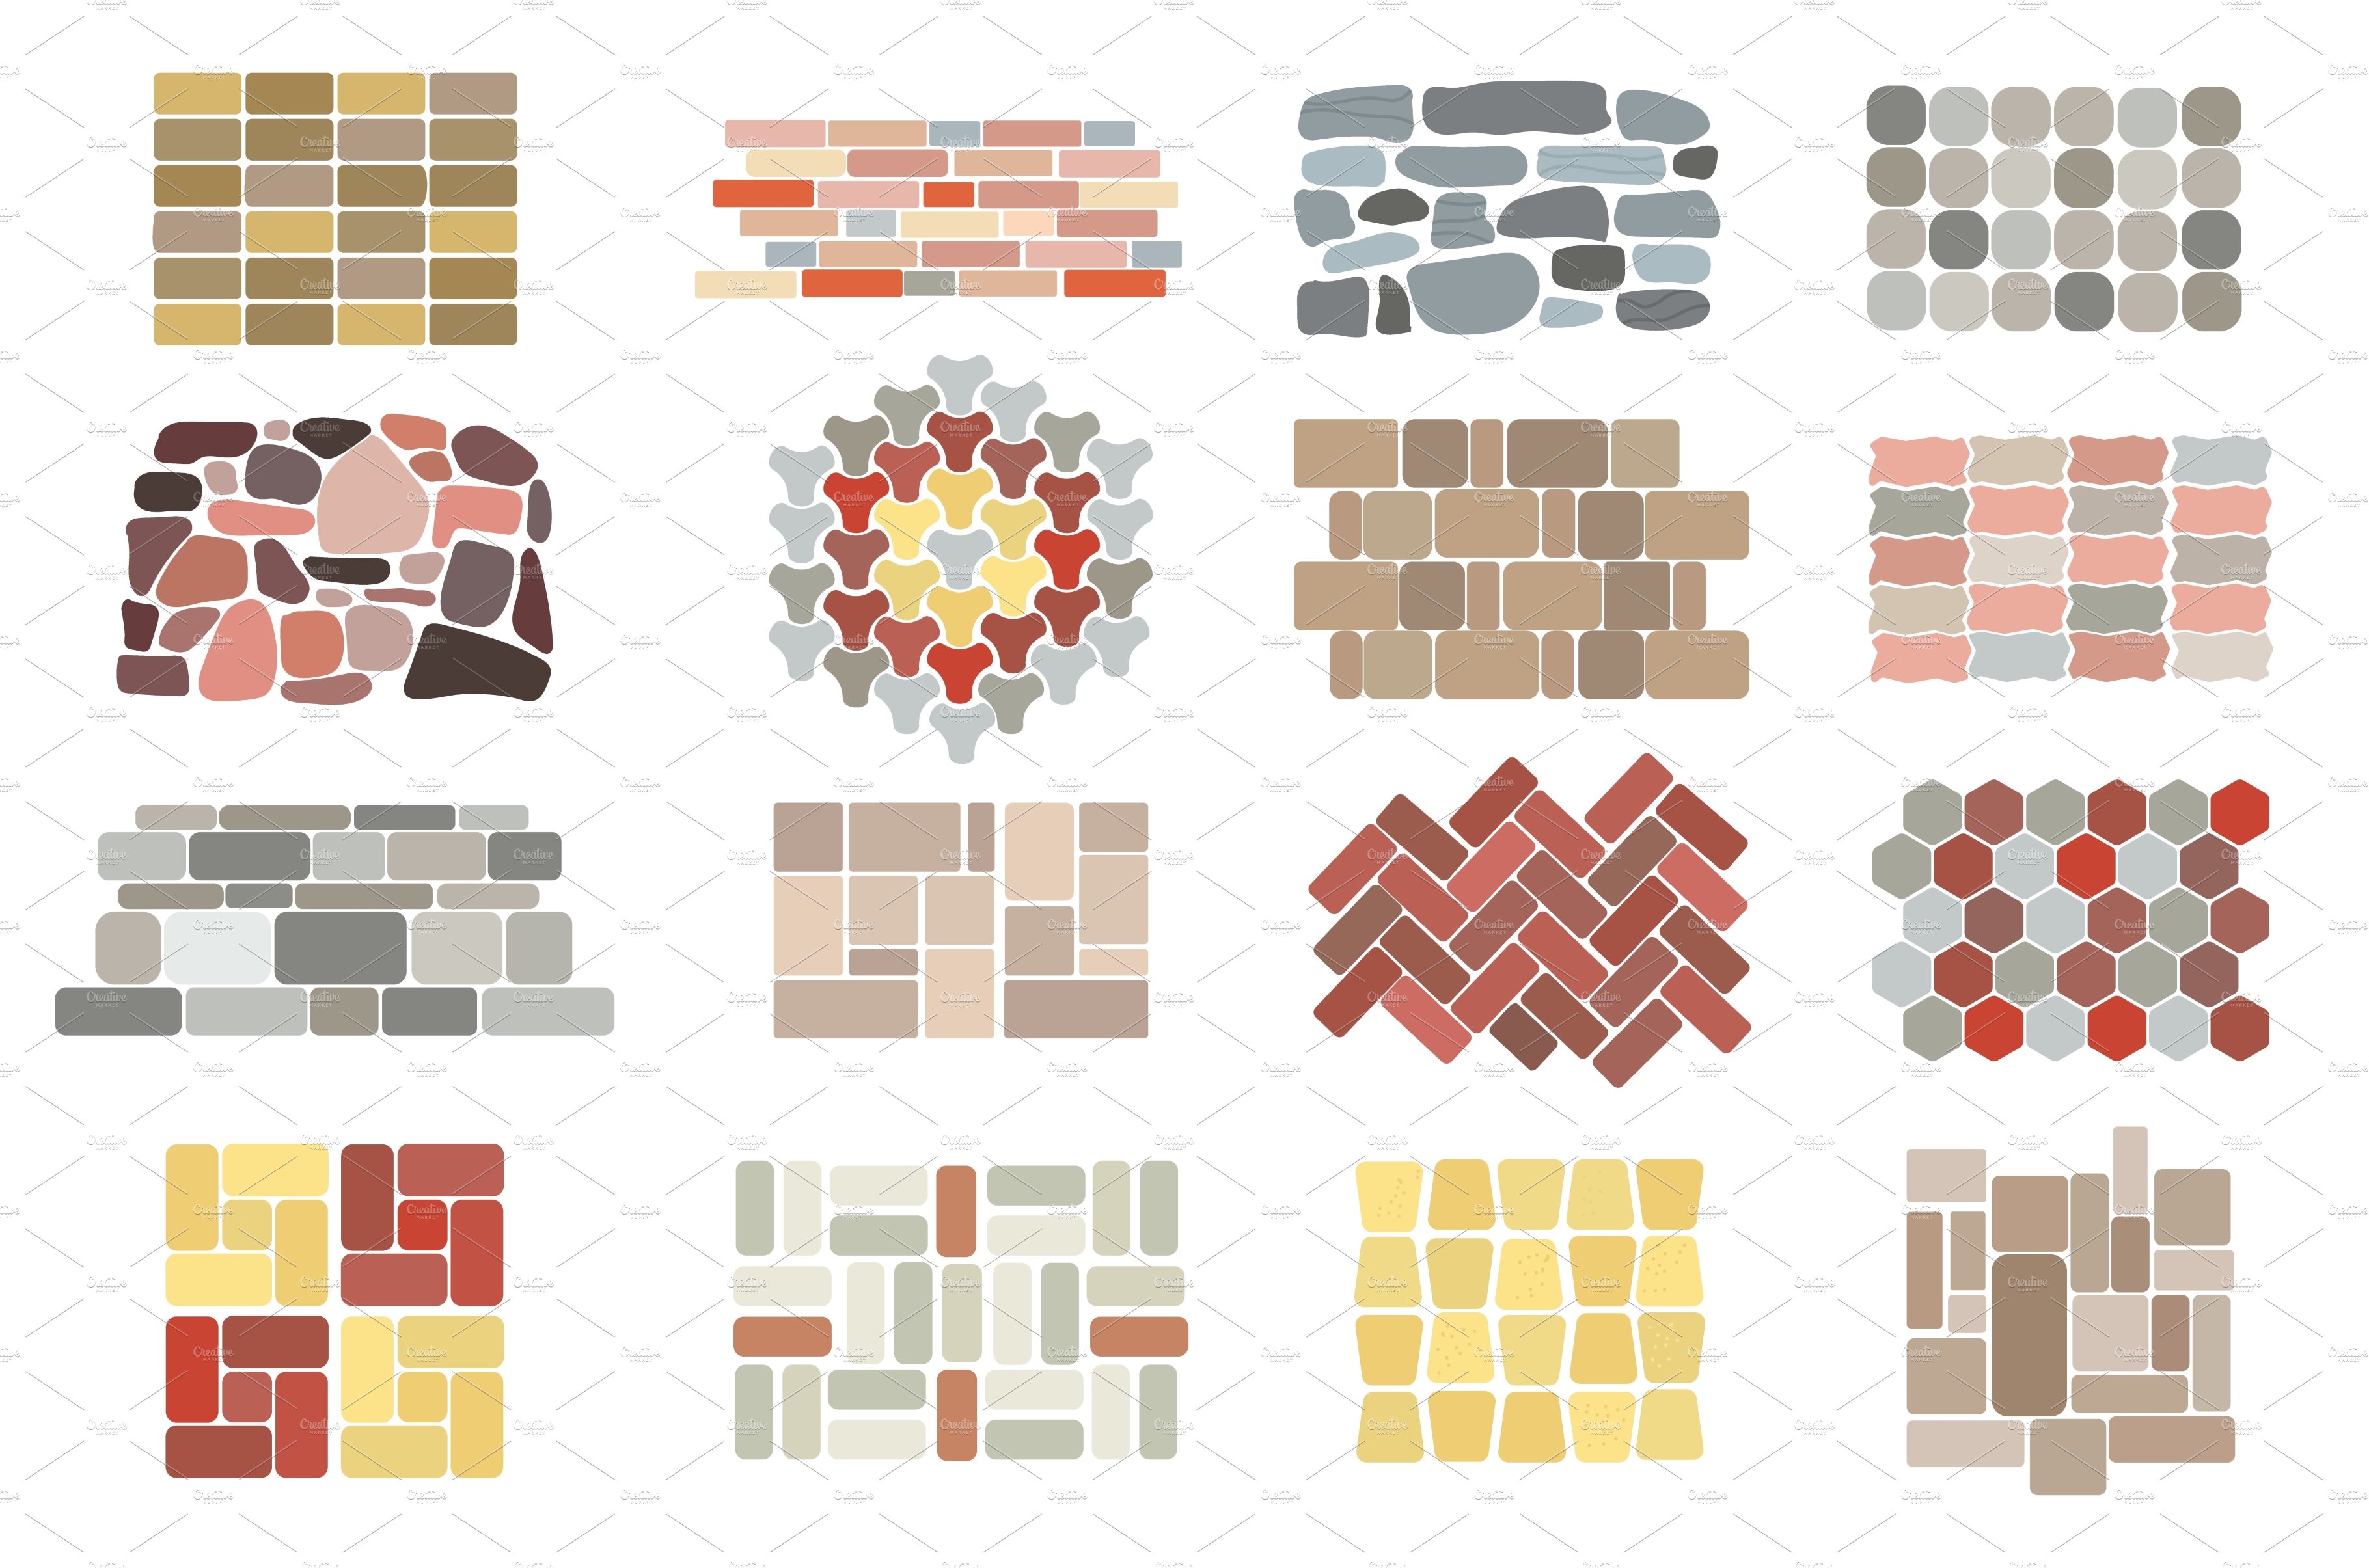 Stone paving tiles. Garden paved cover image.